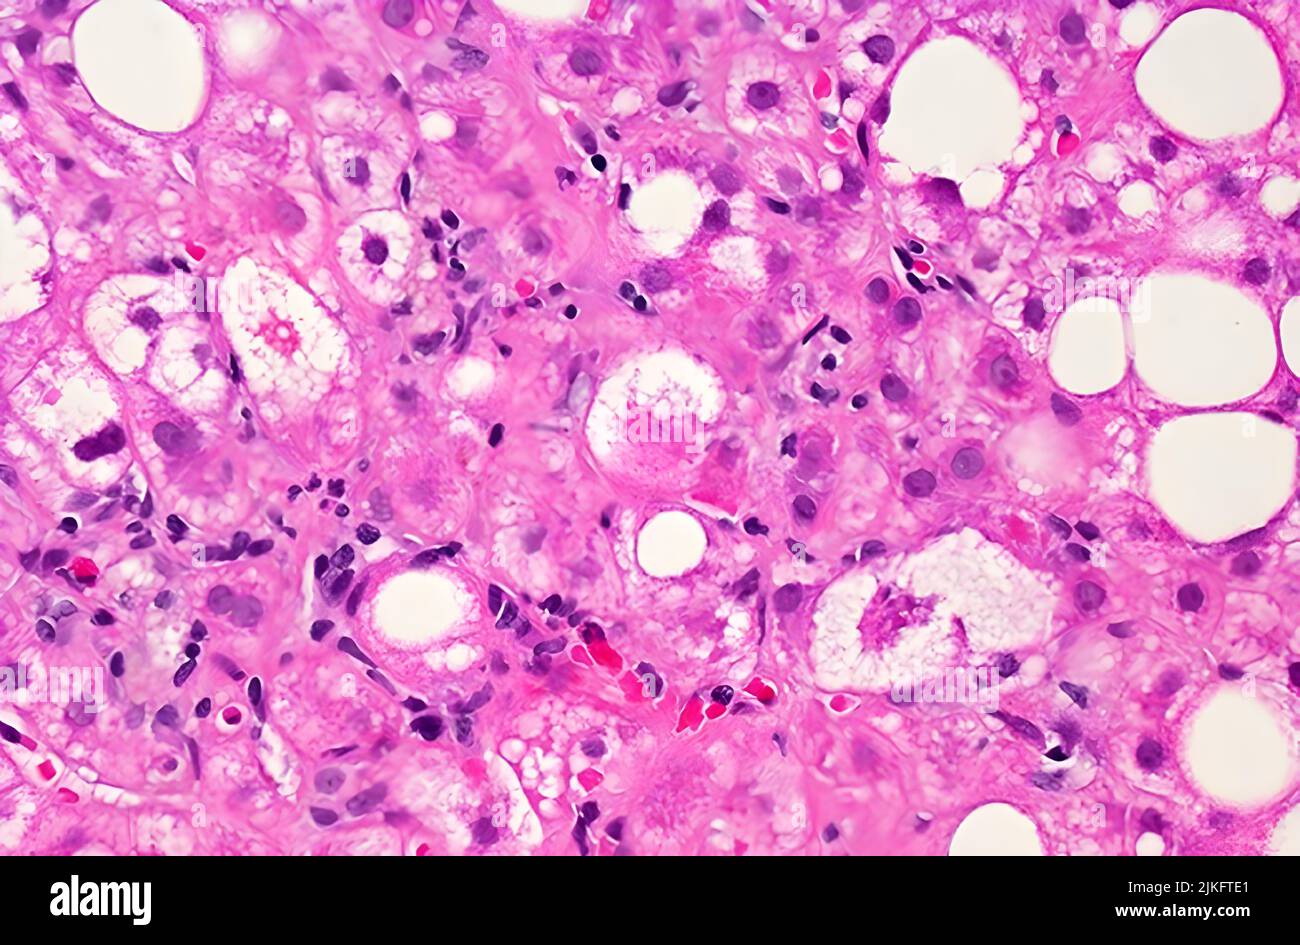 A microscopic image of liver tissue affected by non-alcoholic fatty liver disease (NAFLD). The large and small white spots are excess fat droplets that develop liver cells (hepatocytes). Stock Photo